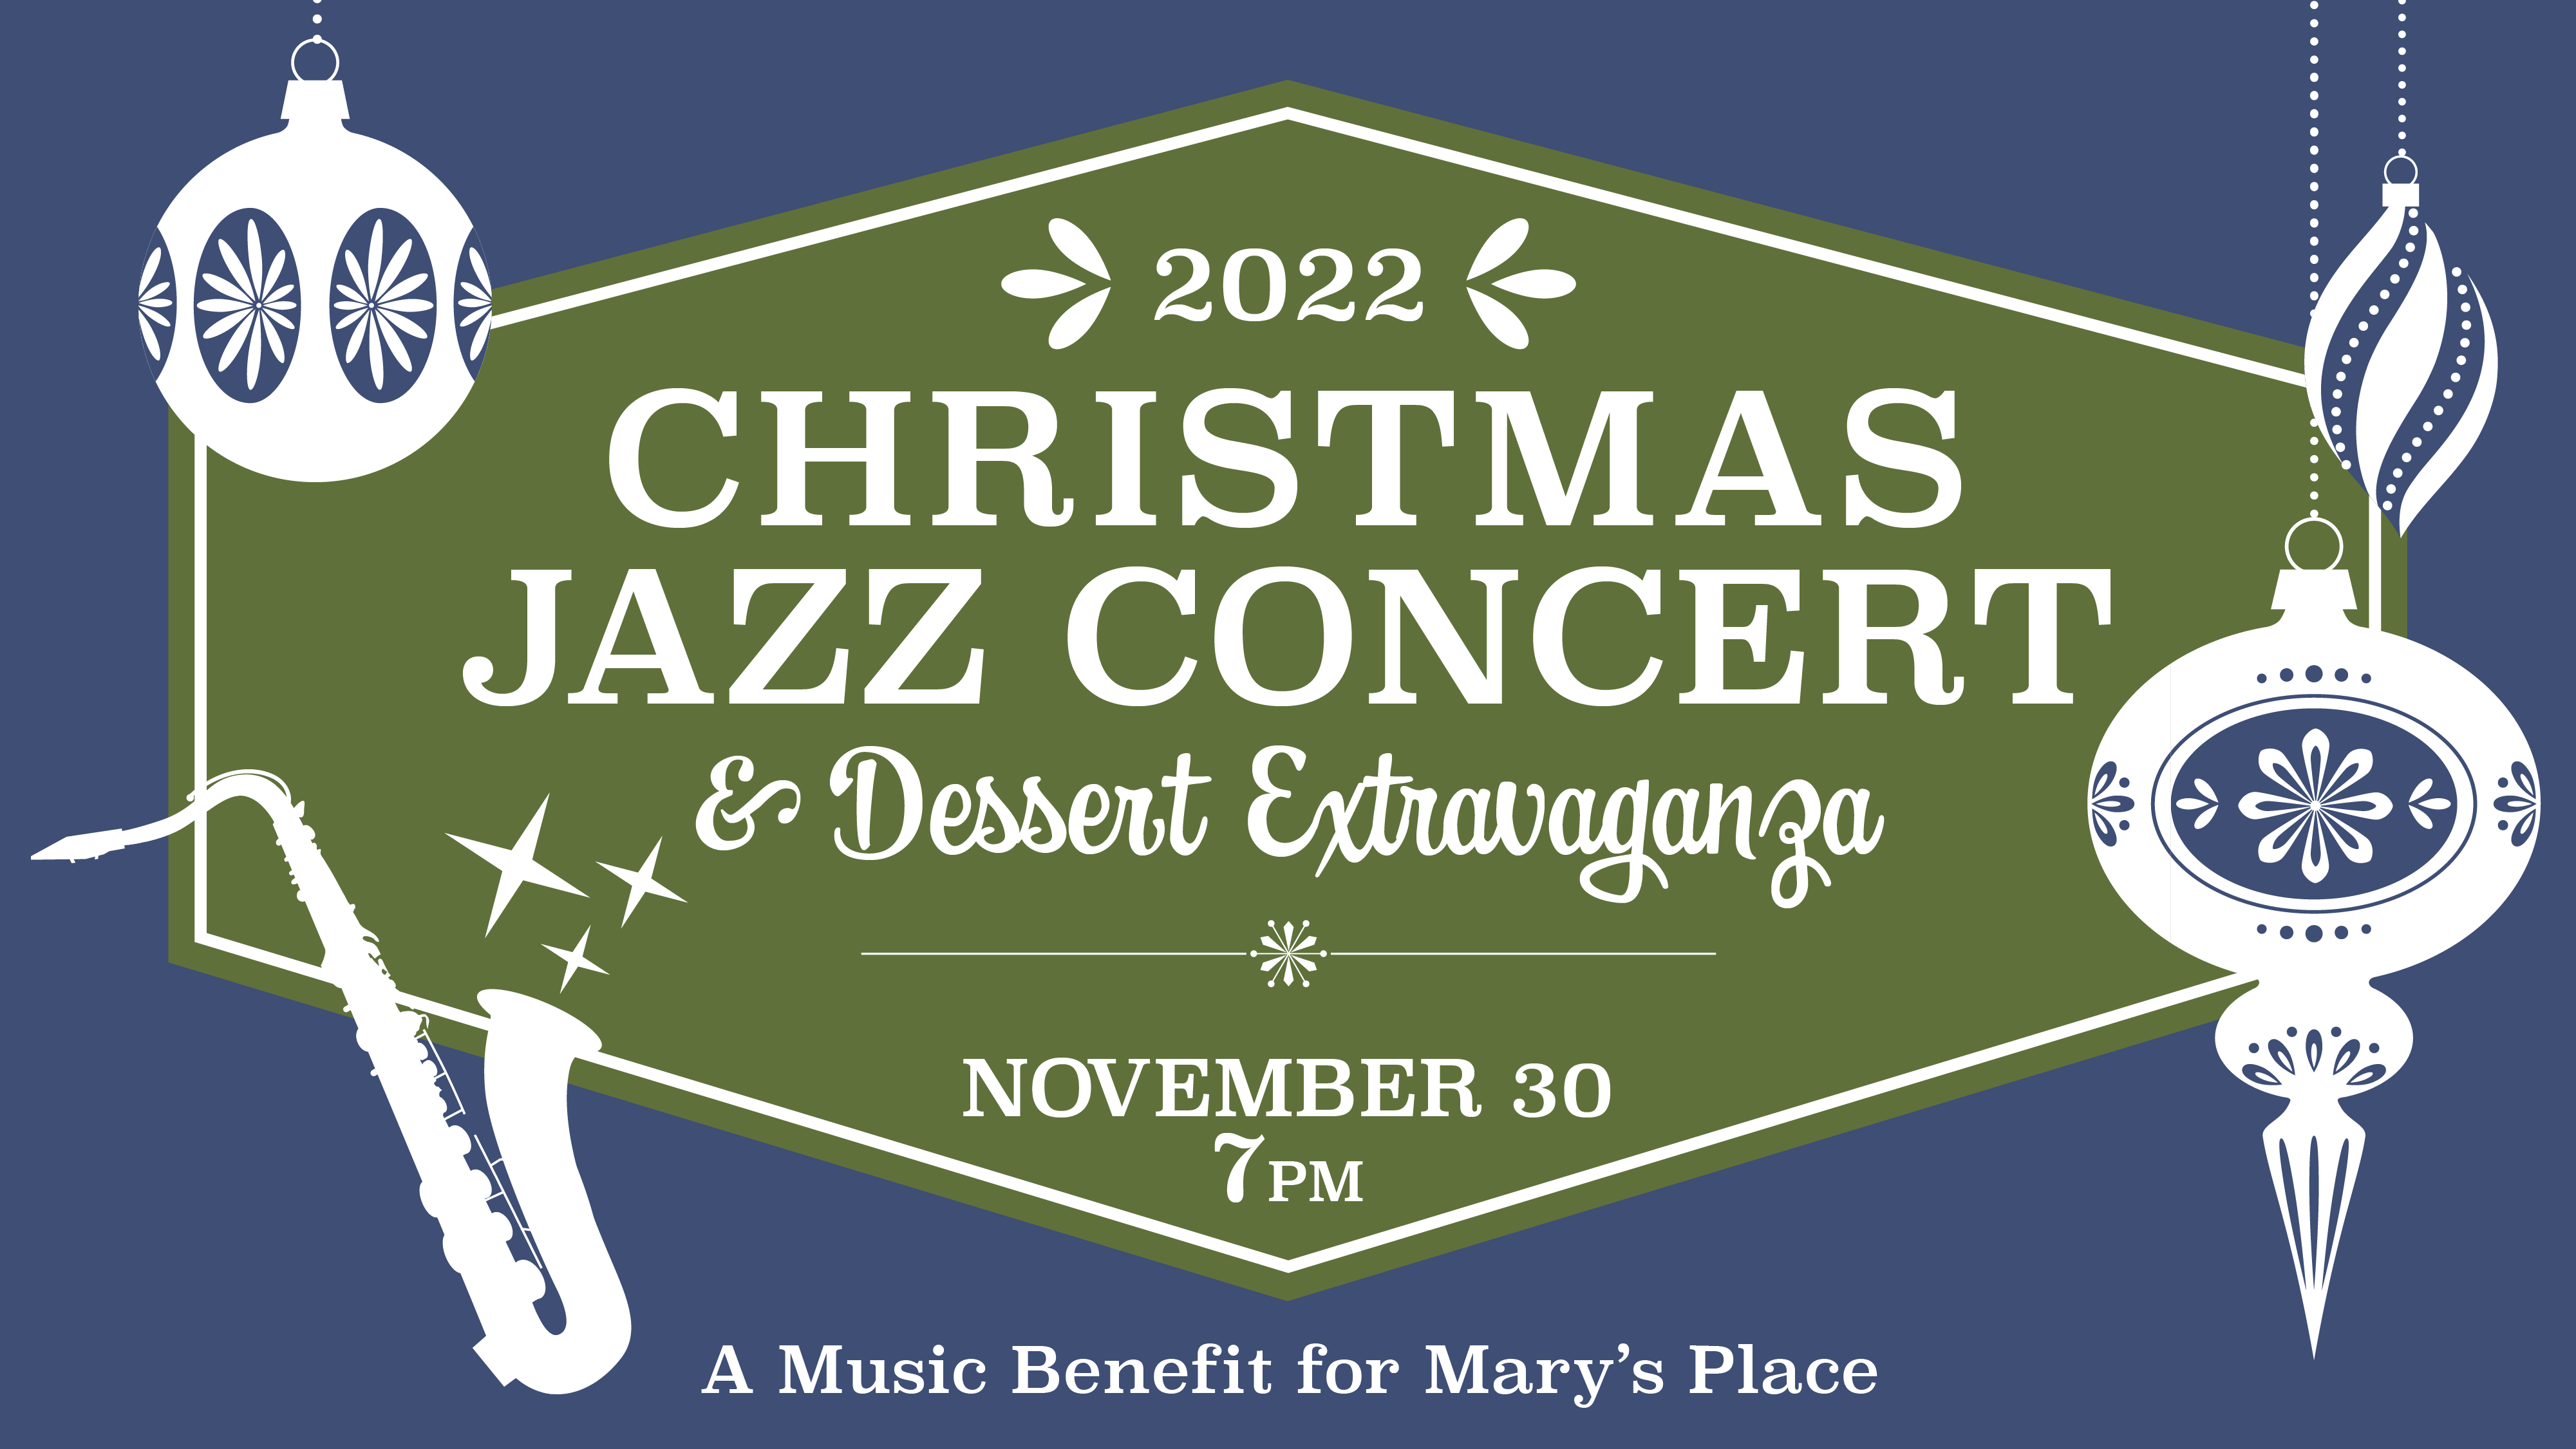 decorative Christmas graphic for jazz concert